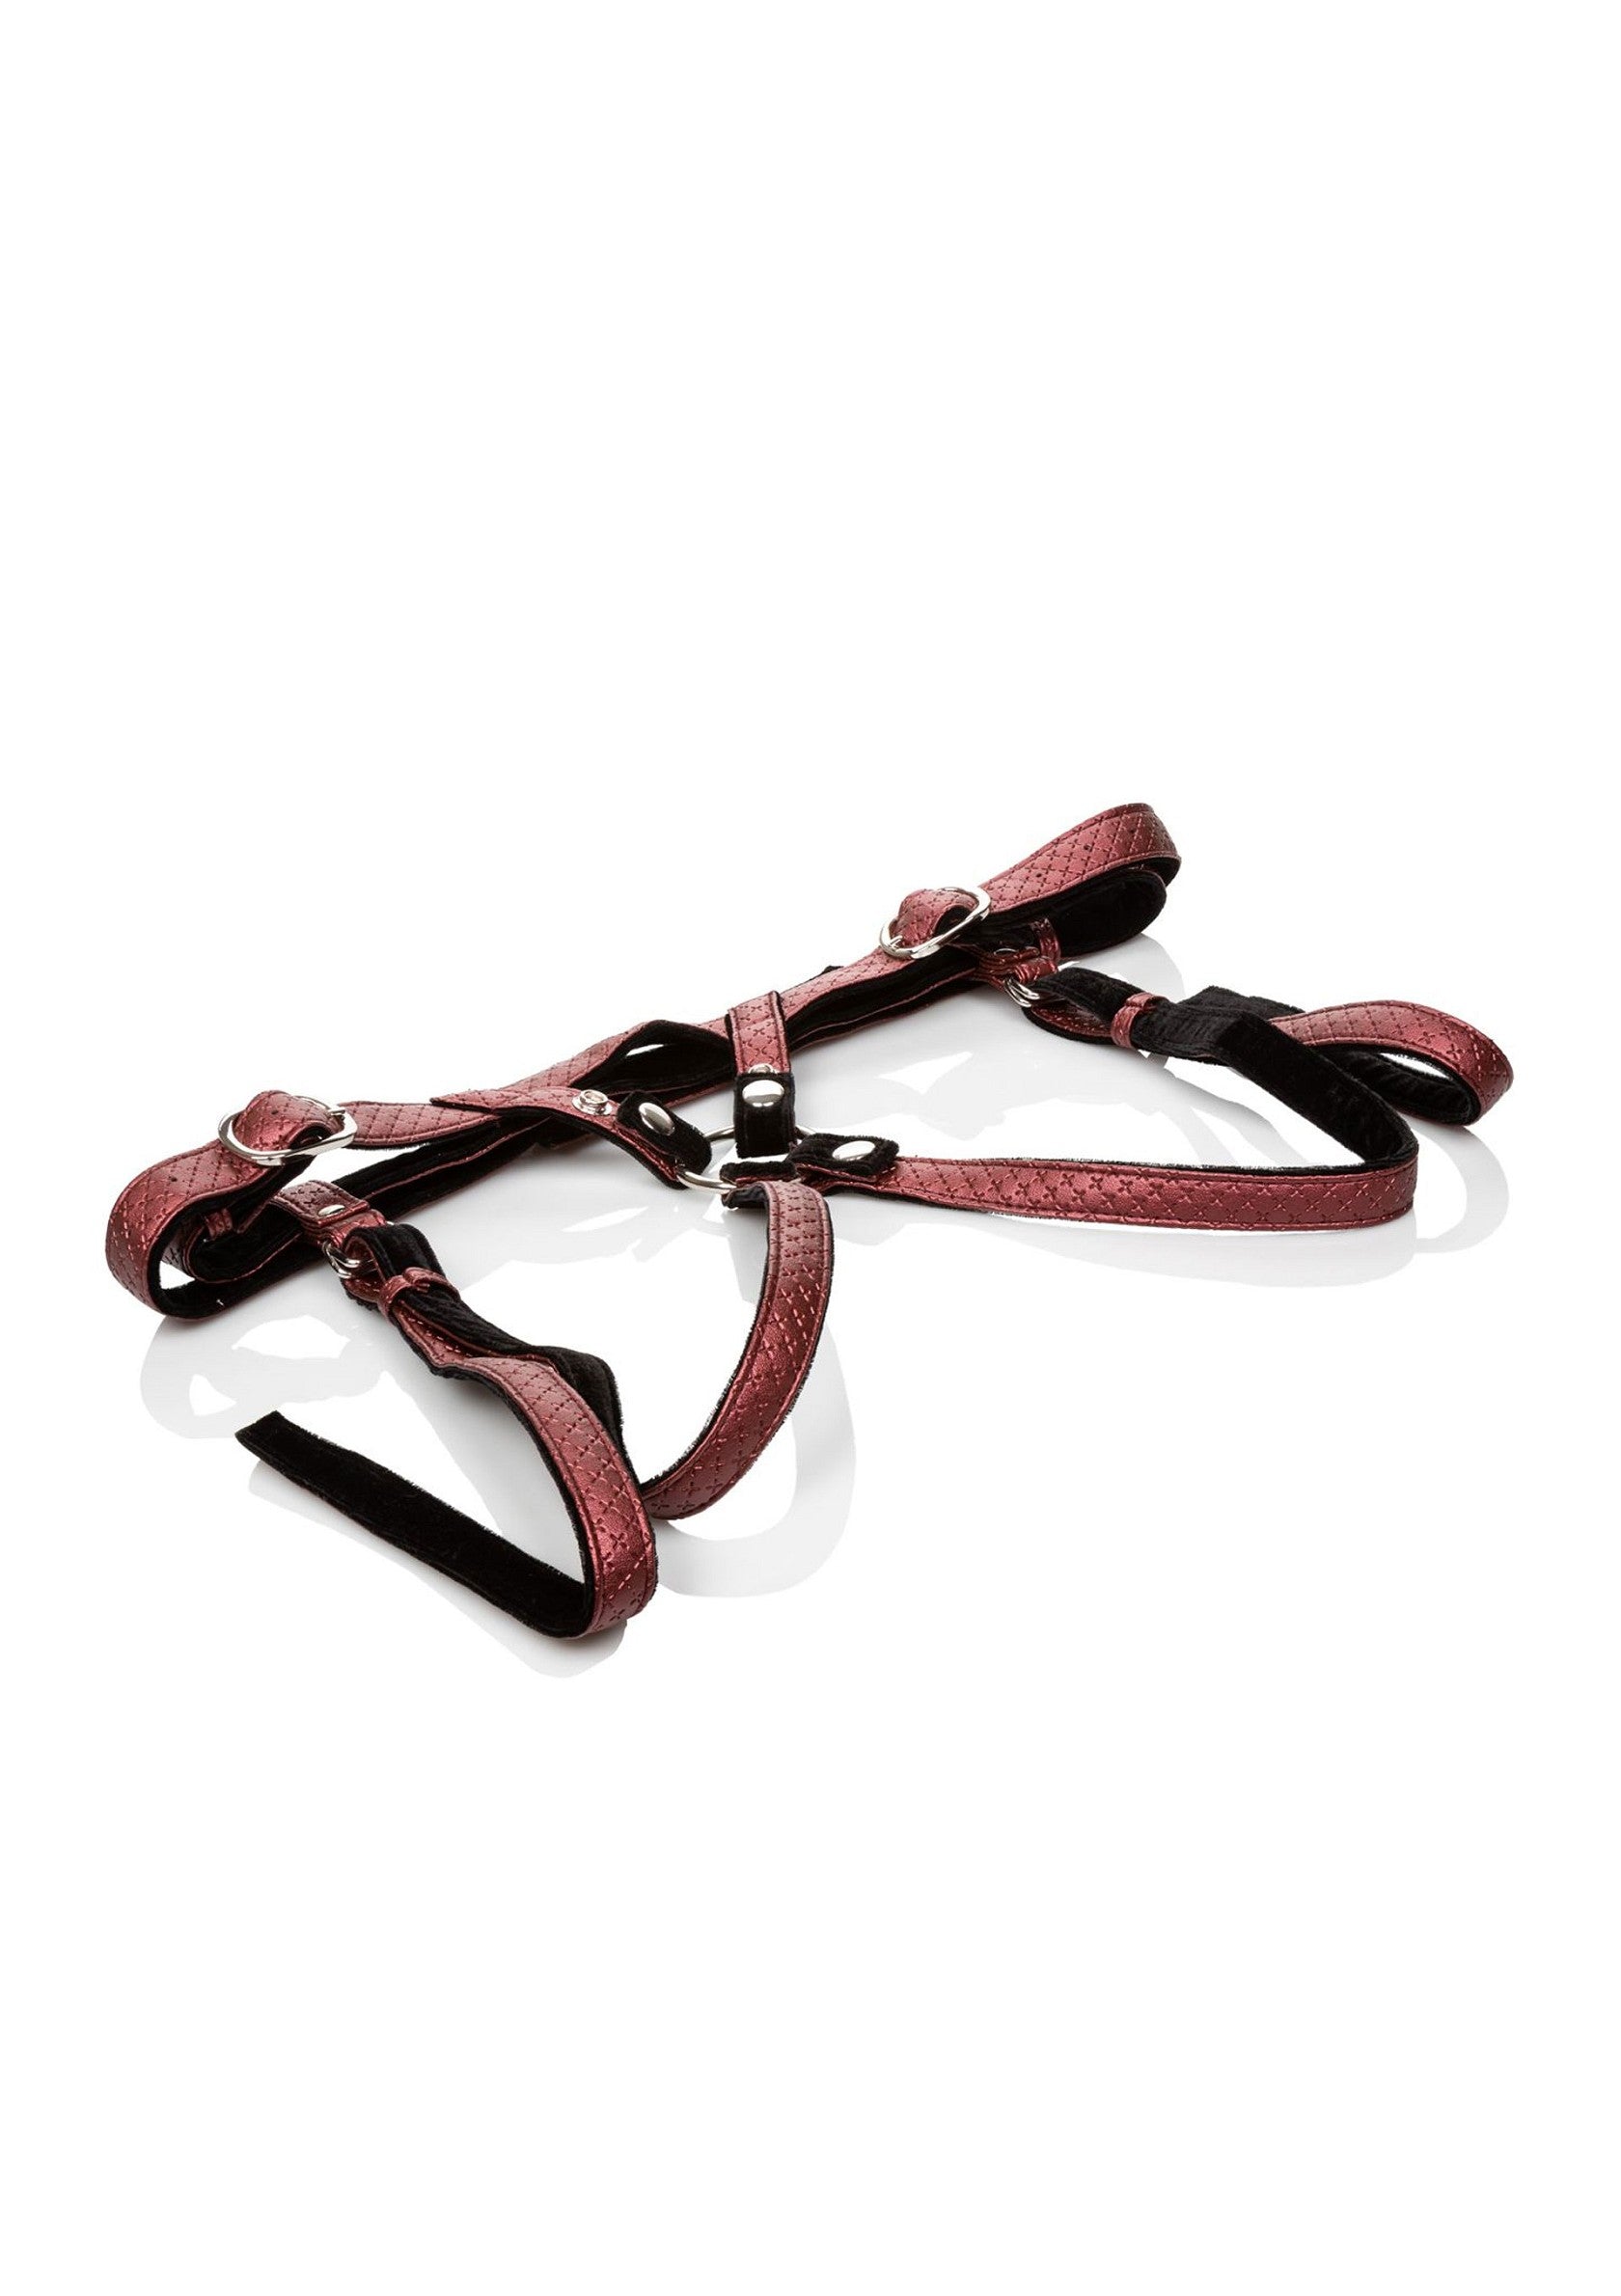 CalExotics Her Royal Harness The Regal Duchess RED - 3